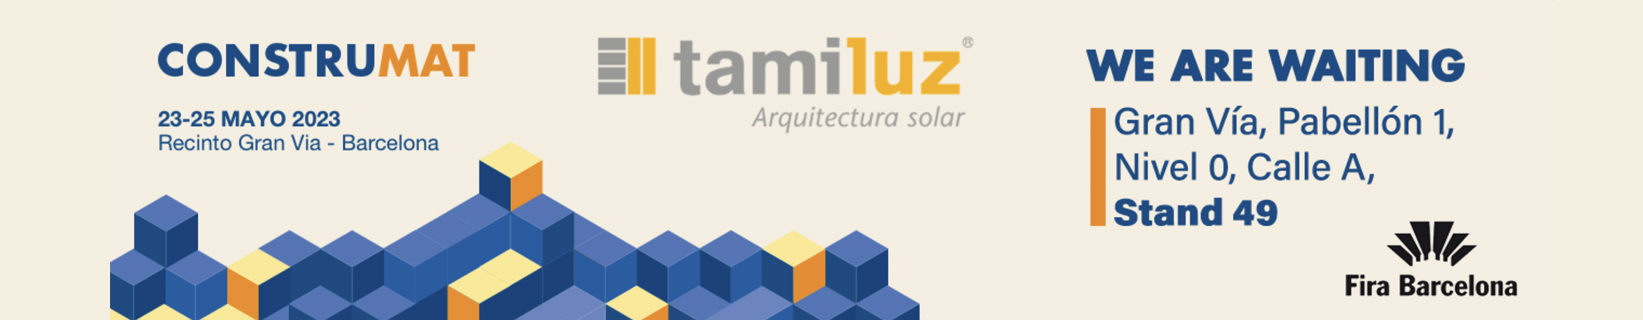 solar protection solutions for buildings and facades made of aluminium, wood and HPL.